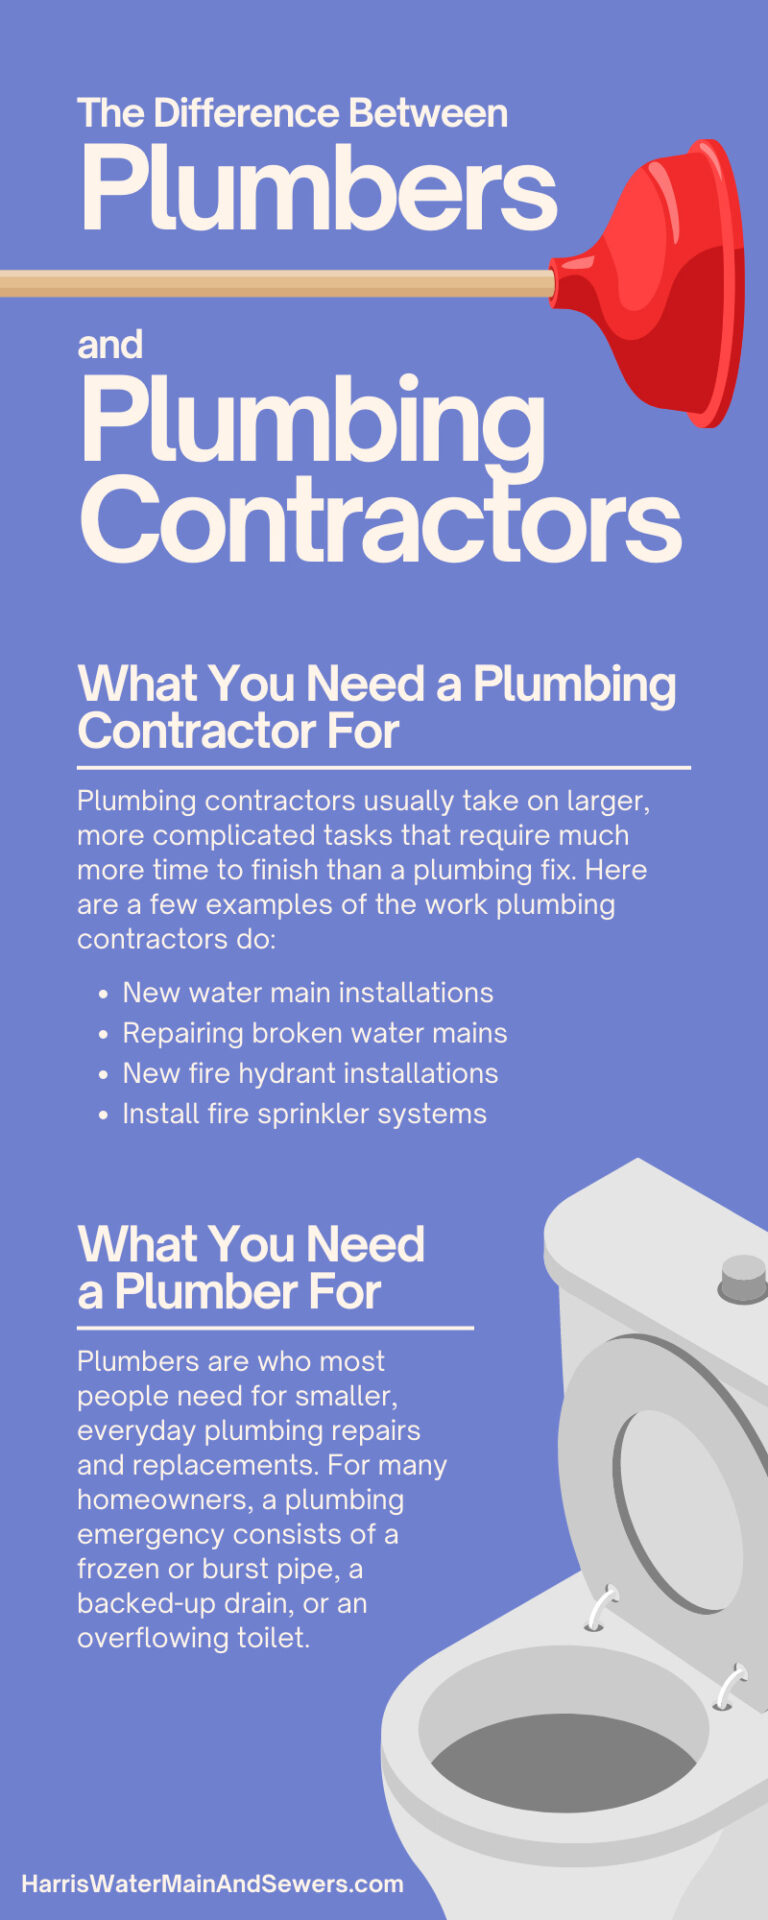 What Is The Difference Between Plumber And Plumber?